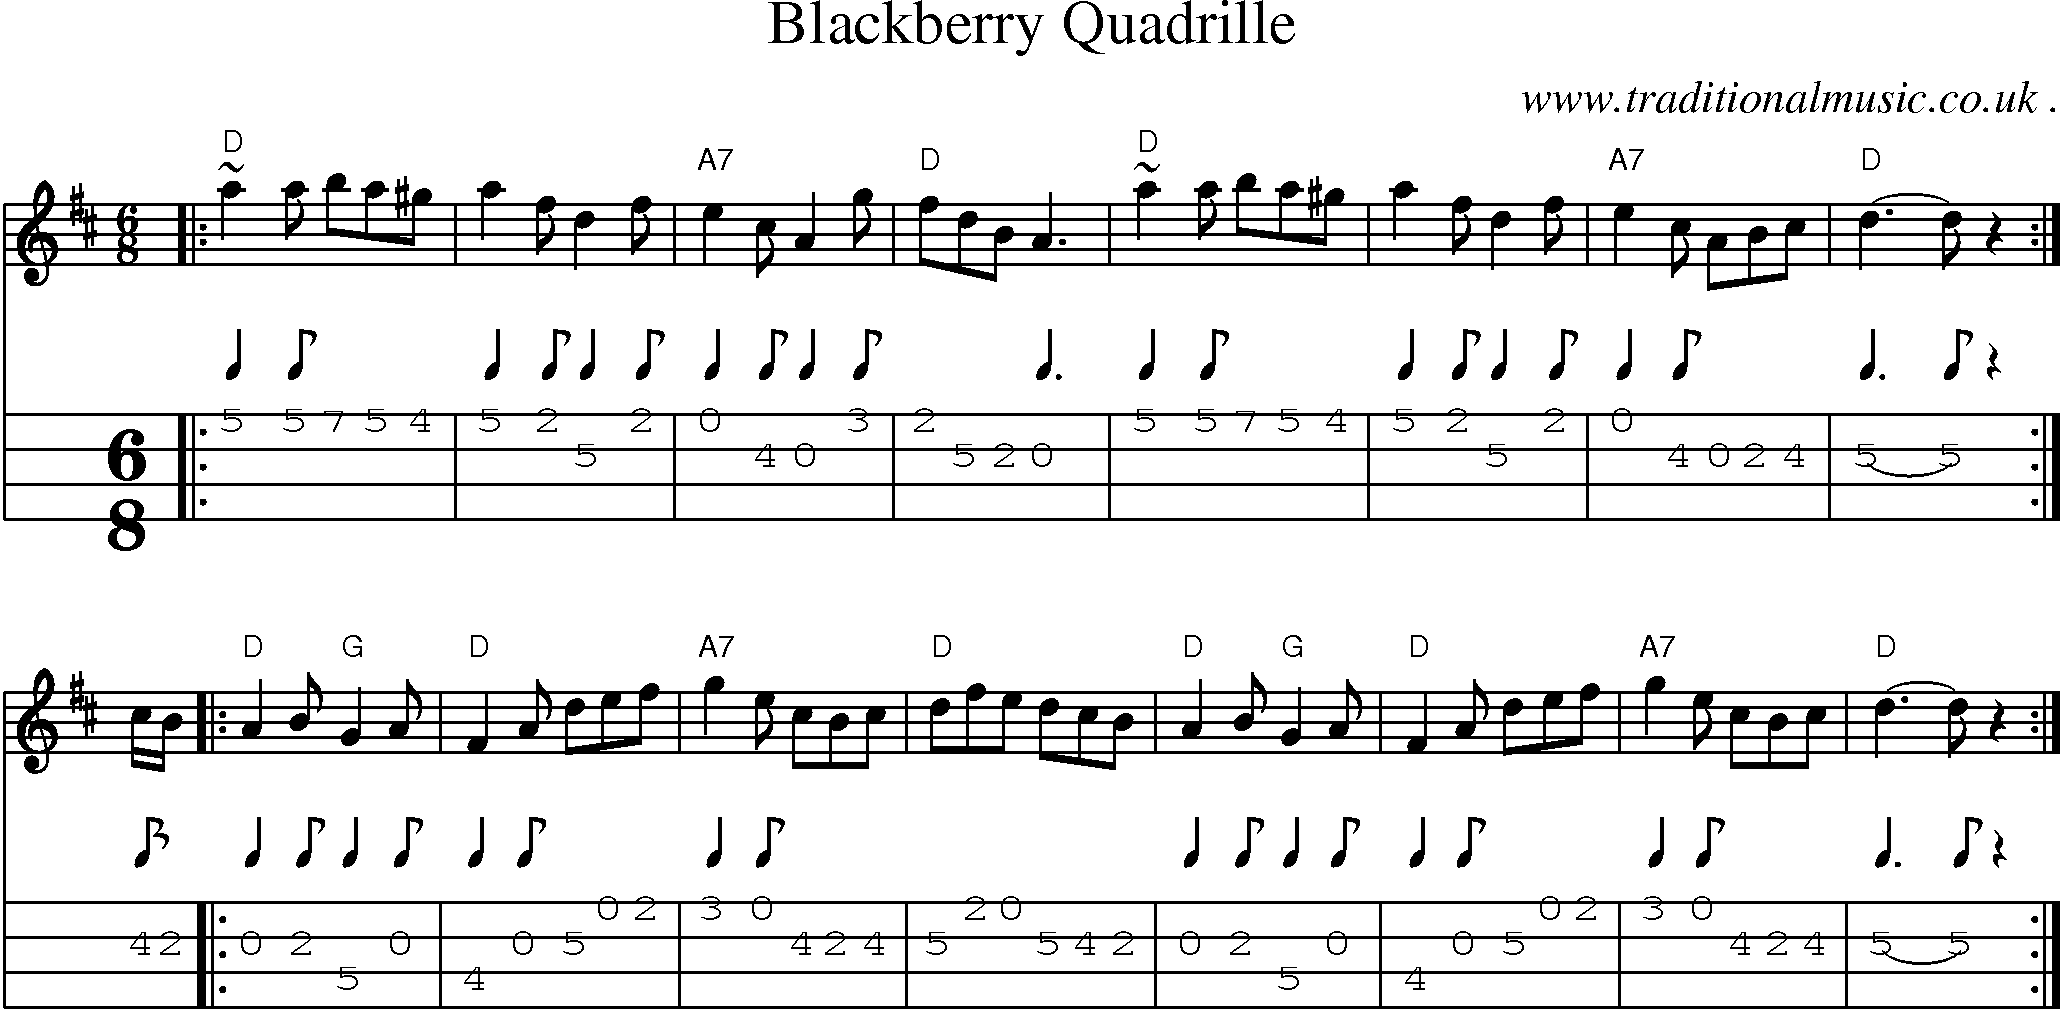 Sheet-music  score, Chords and Mandolin Tabs for Blackberry Quadrille